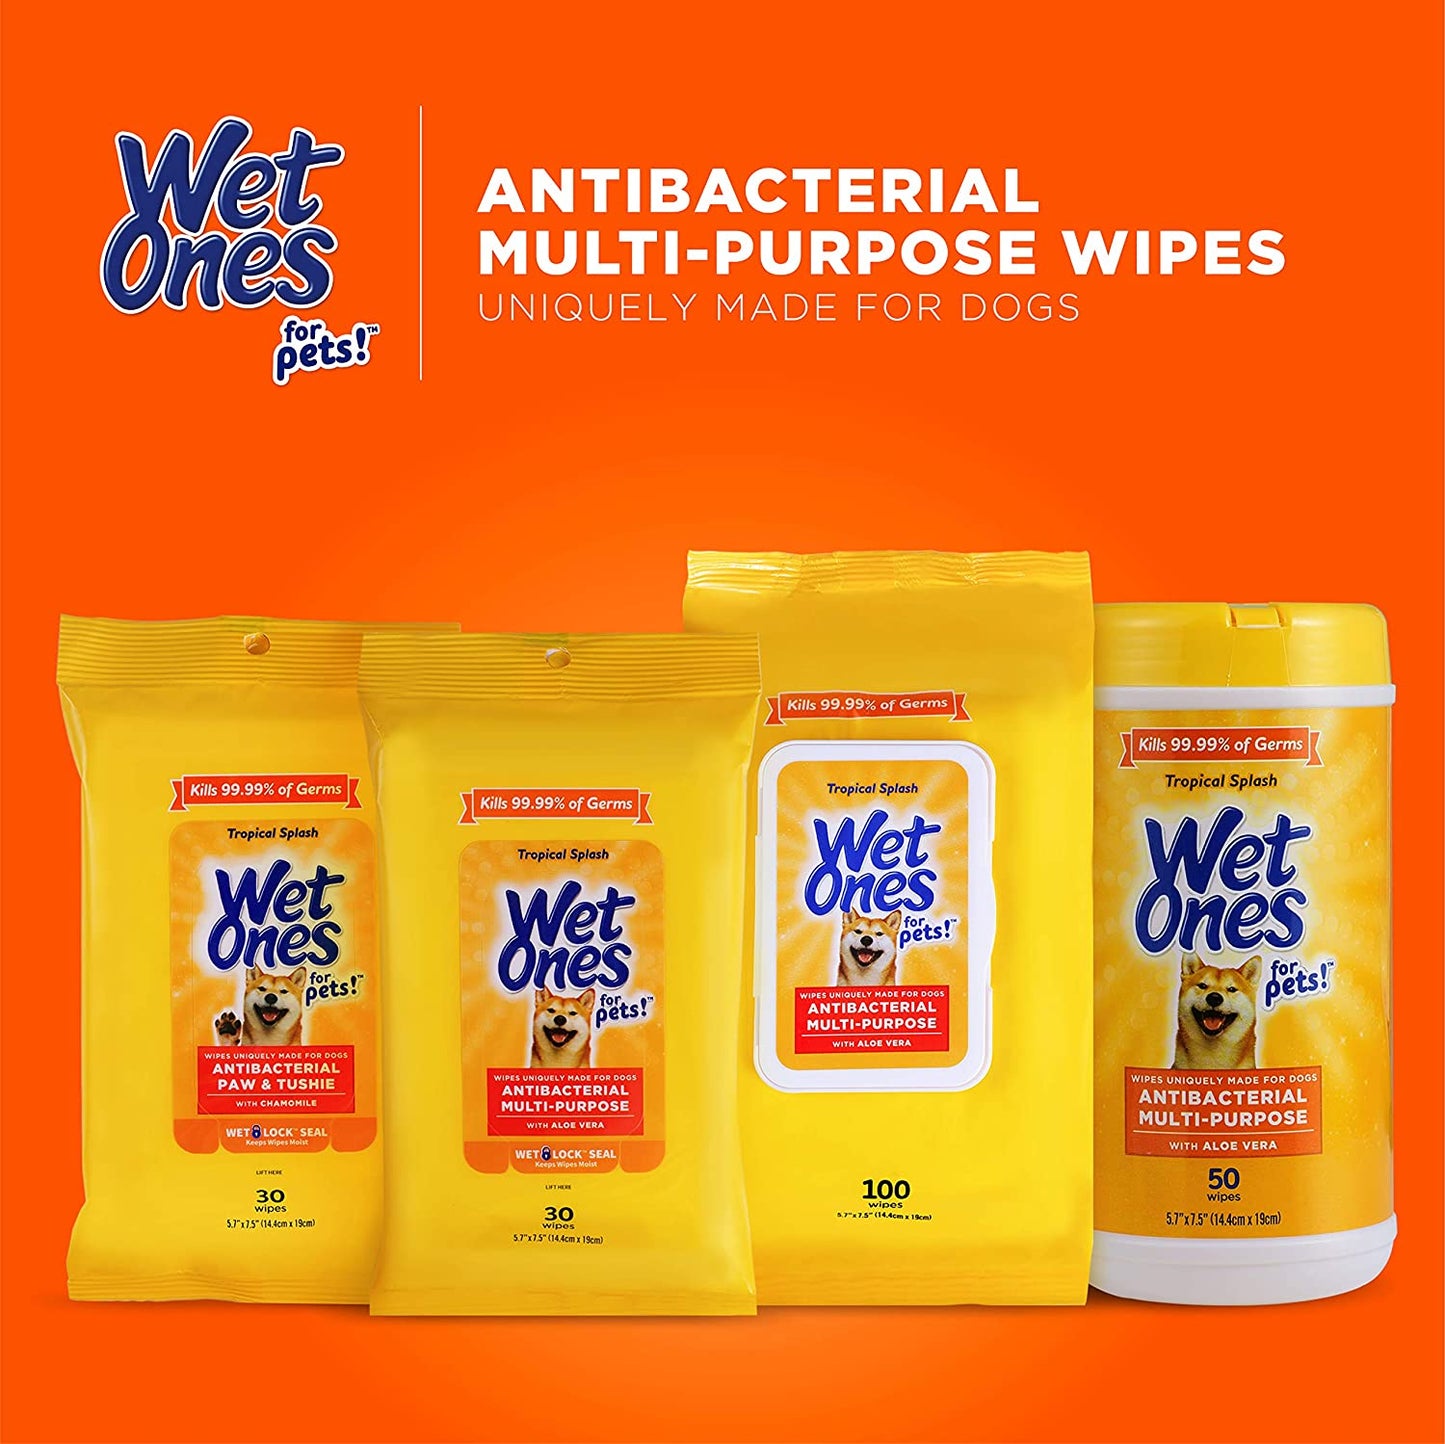 Wet Ones for Pets Multi-Purpose Dog Wipes with Aloe Vera | Dog Wipes for All Dogs in Tropical Splash, Wipes for Paws & All Purpose | 50 Ct Cannister Dog Wipes